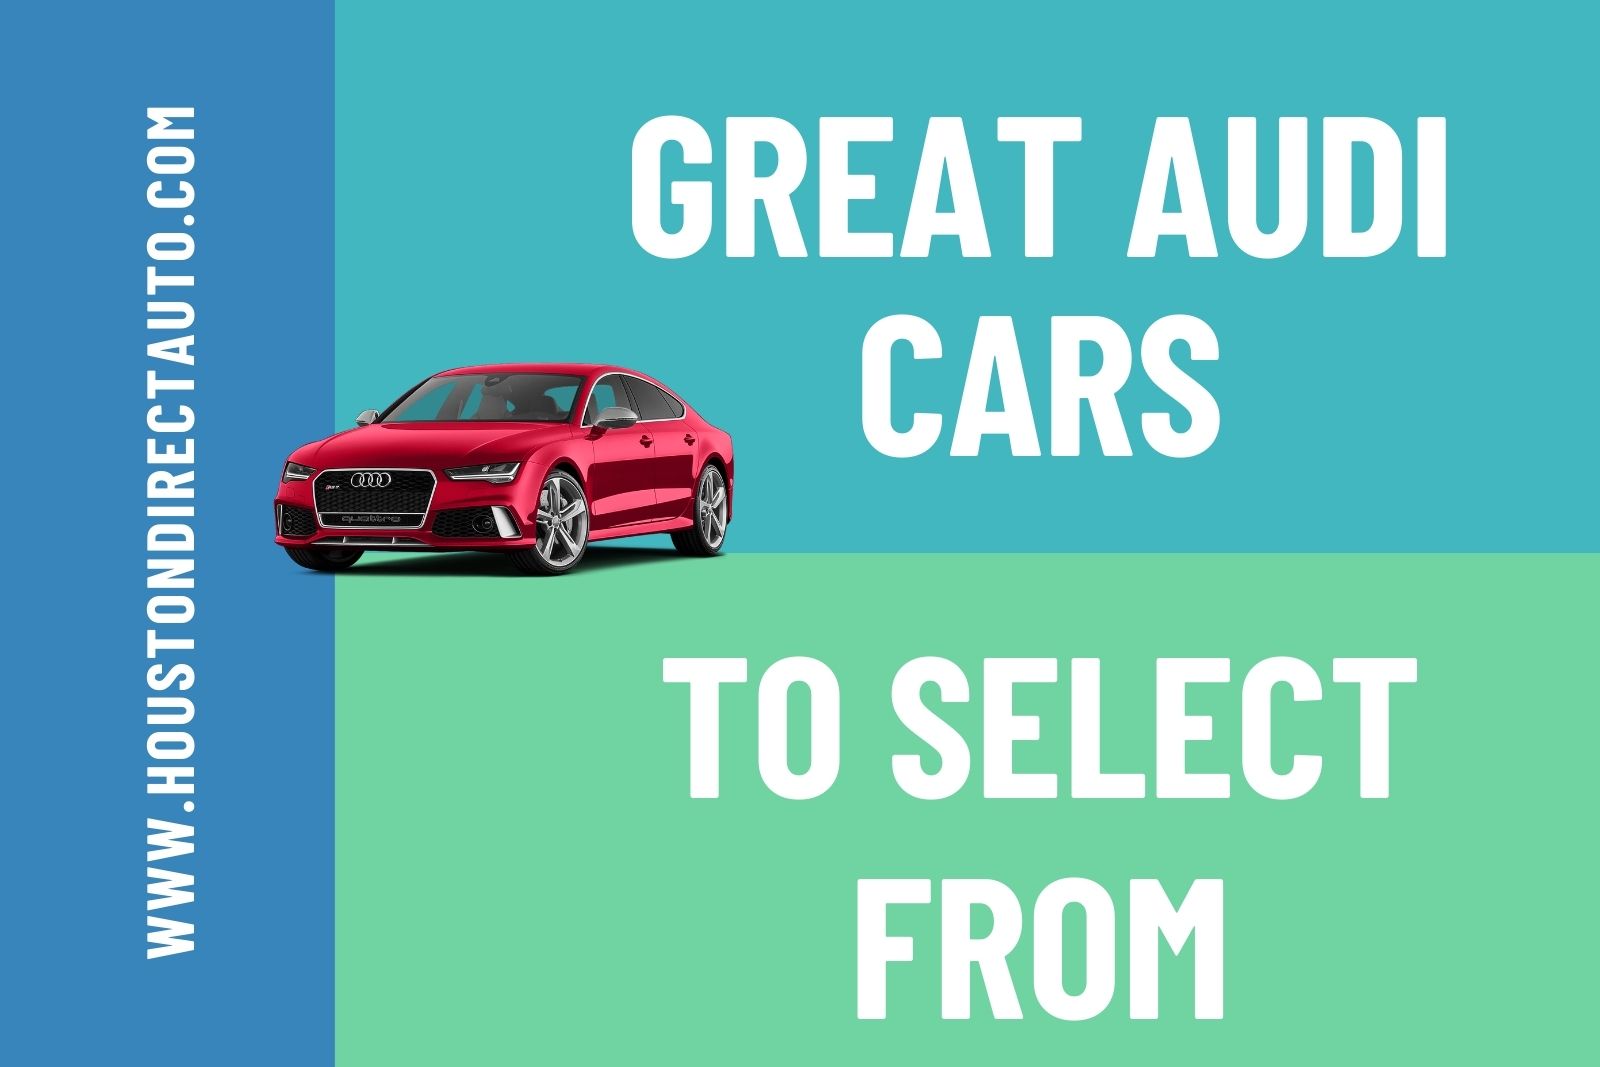 Five Great Audi Used Cars Models To Select From